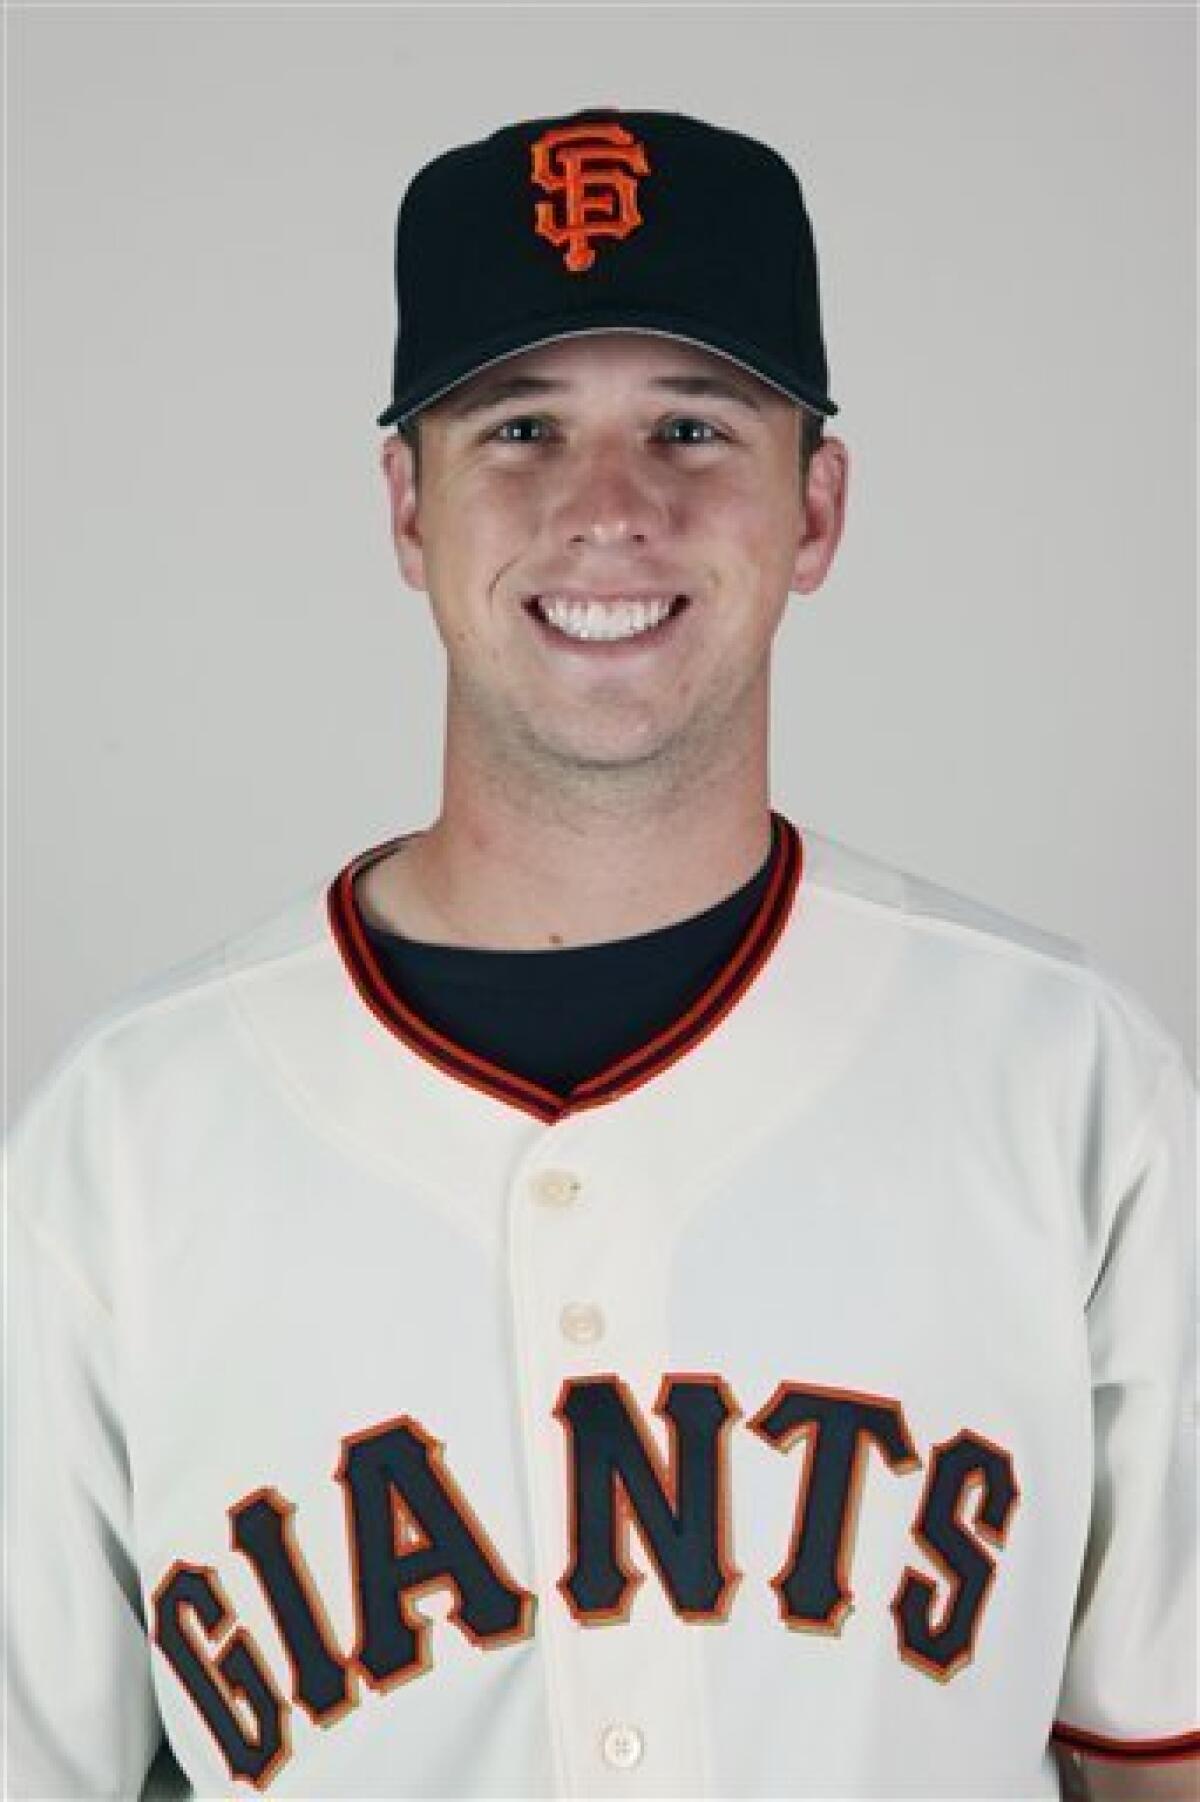 buster posey rookie